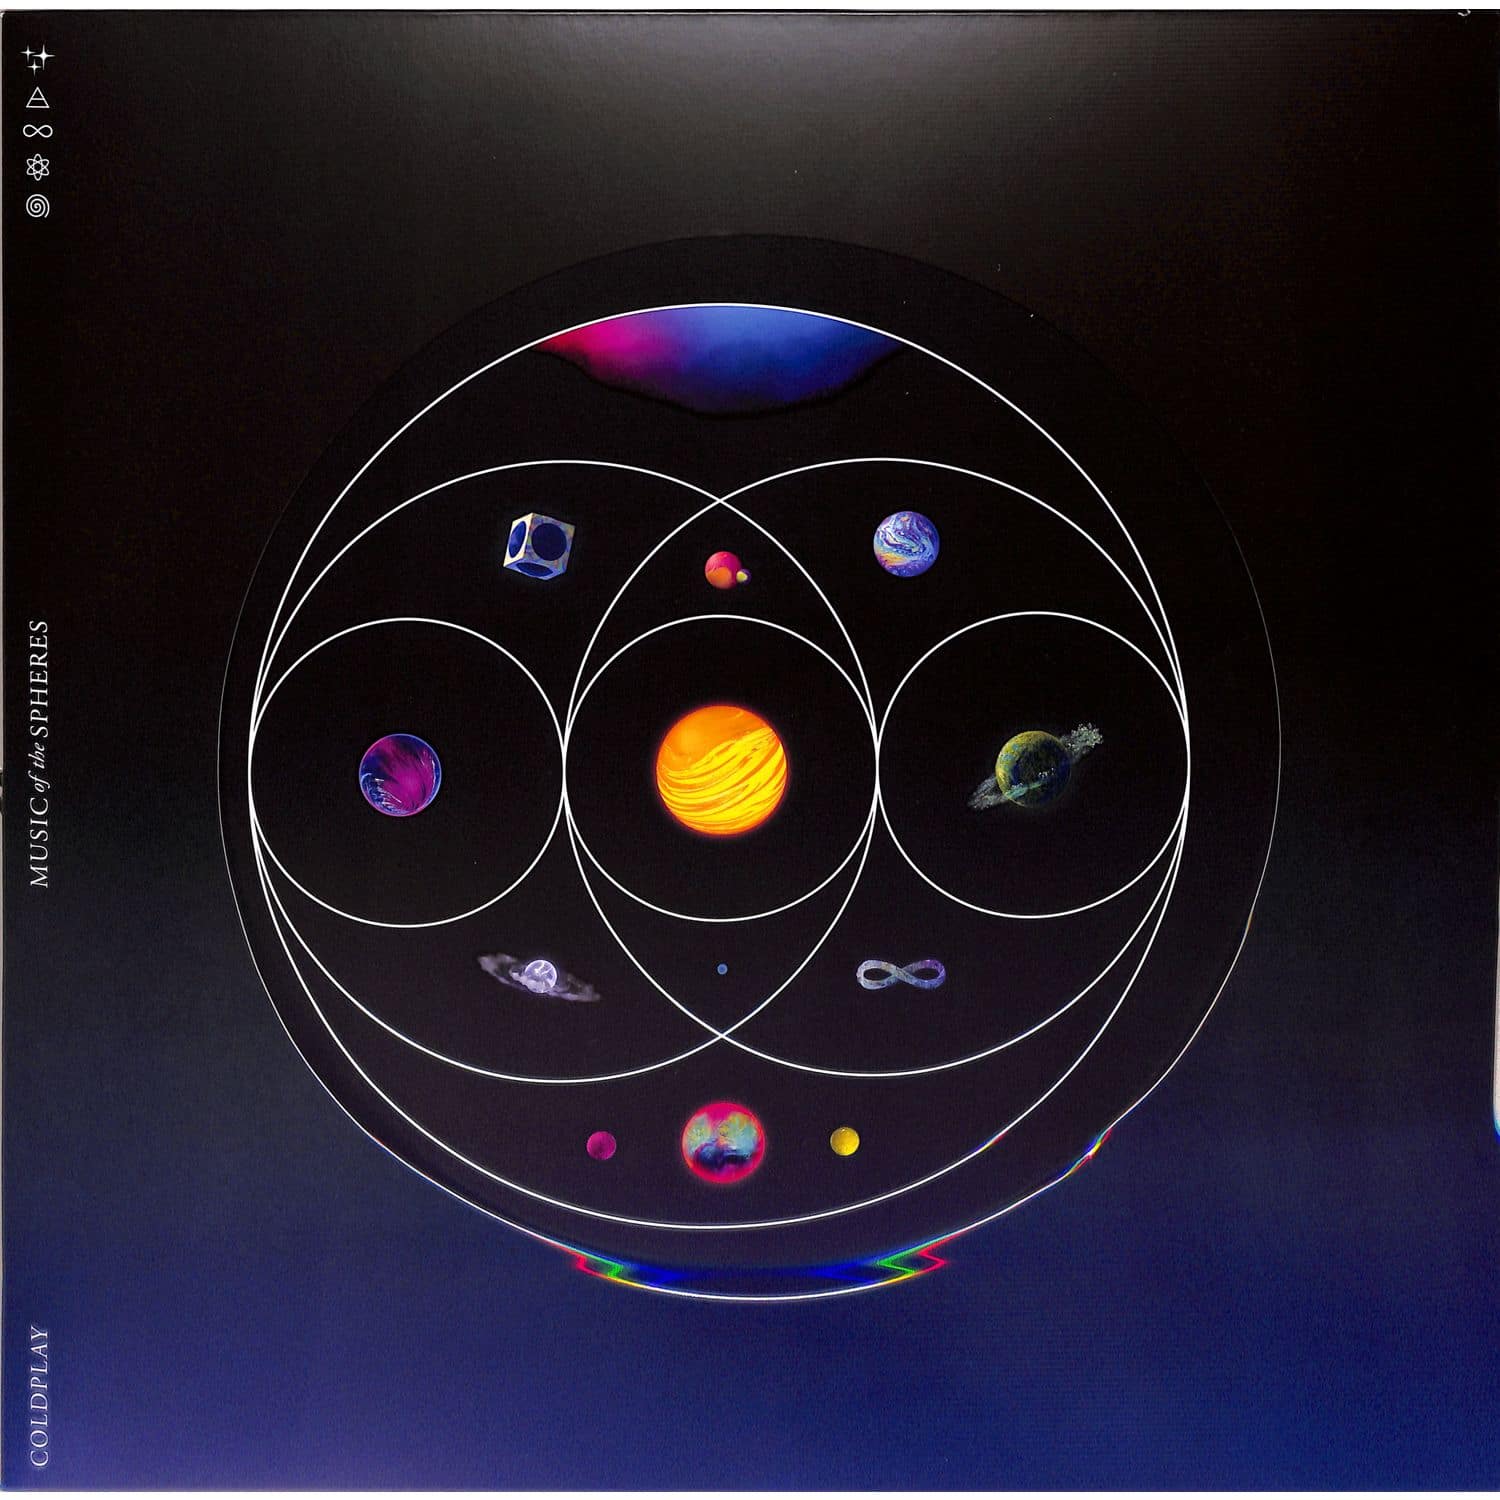 Coldplay - MUSIC OF THE SPHERES 